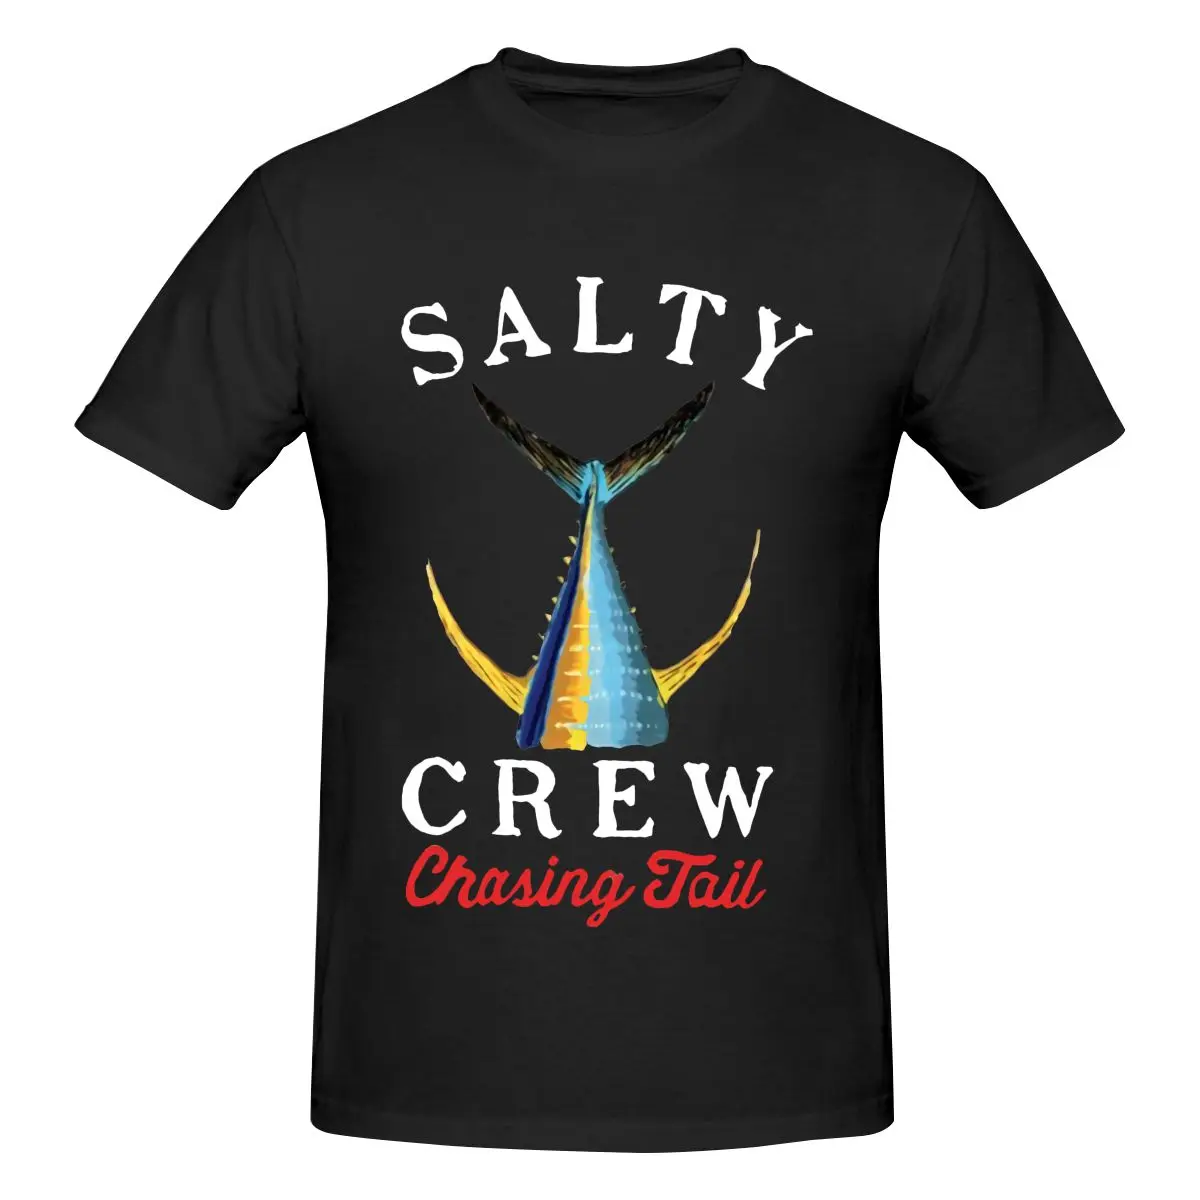 

Salty Crew Tailed All Vintage Fashion Short Sleeve Men Summer Loose Niche High Street Top Graphic T Shirts